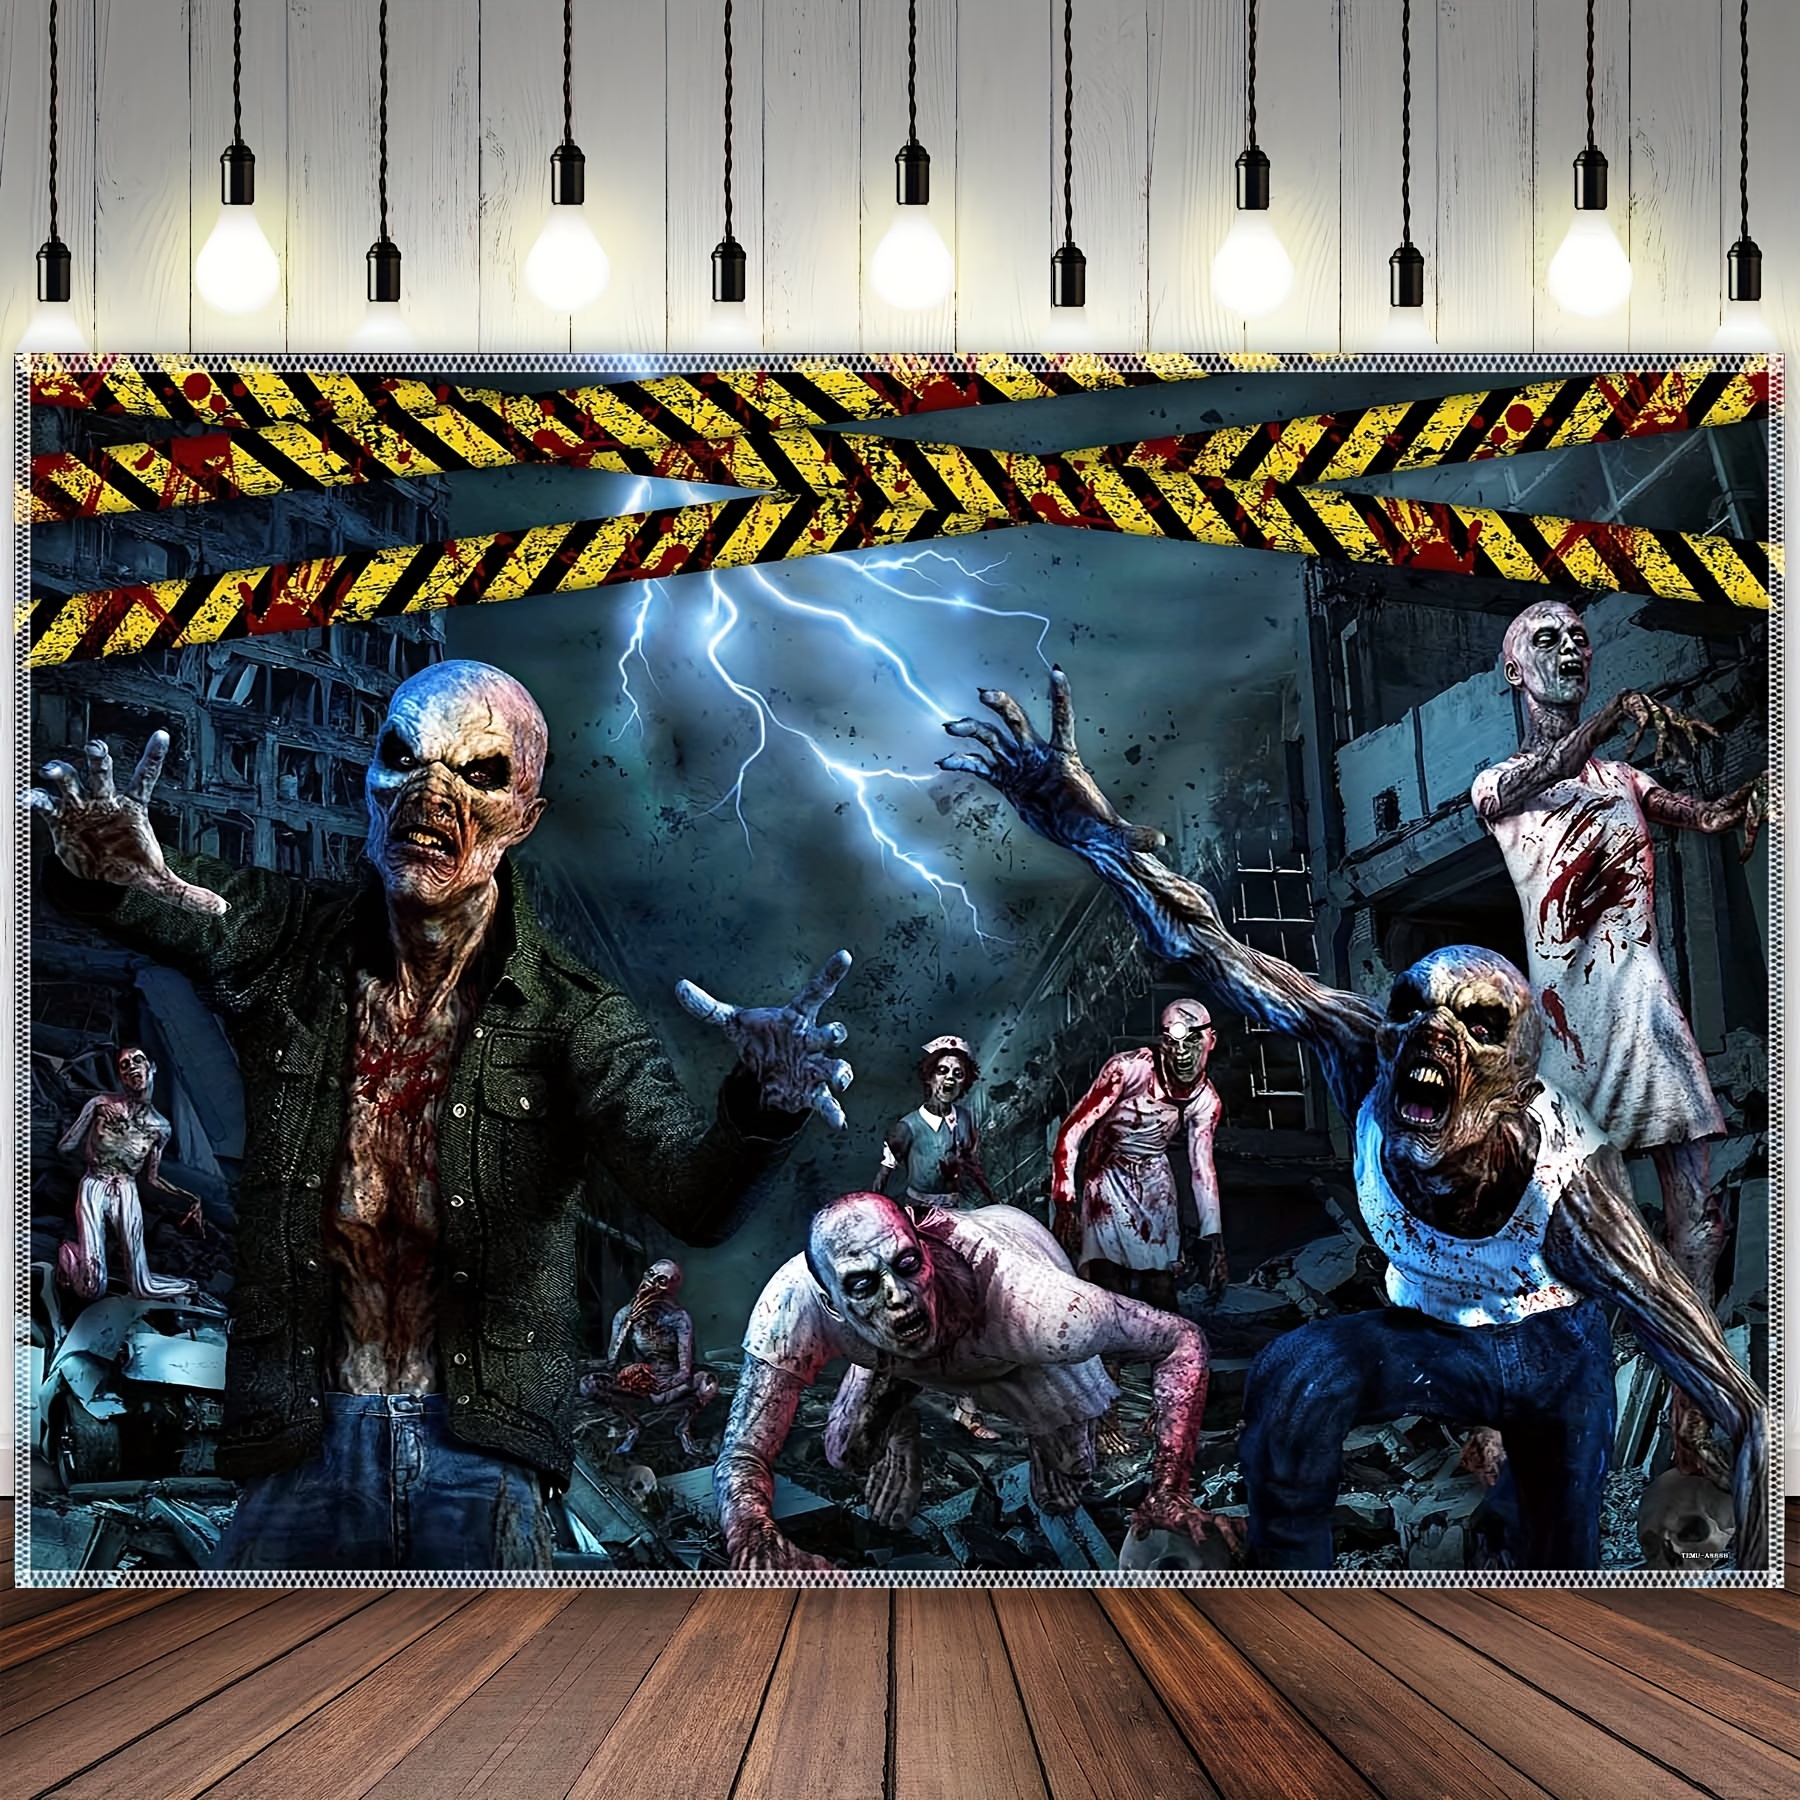 7x5ft halloween zombie polyester photography backdrop spook up your photos with a destroyed city ruins blood cordon banner decorations perfect for kids photo booths christmas halloween decorations details 1